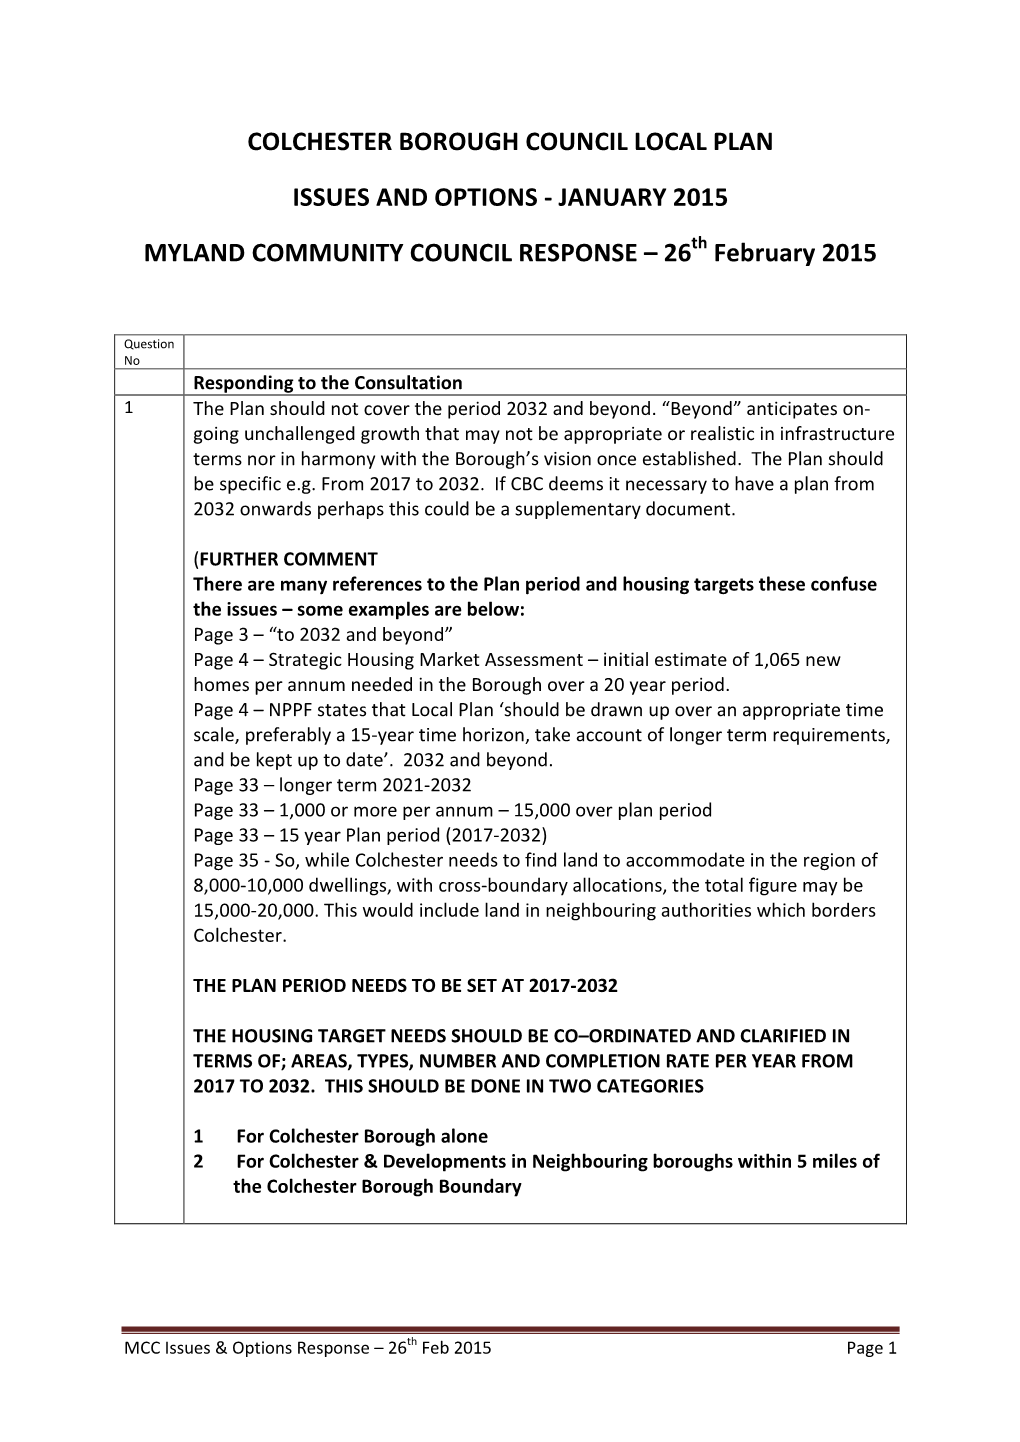 Colchester Borough Council Local Plan Issues And